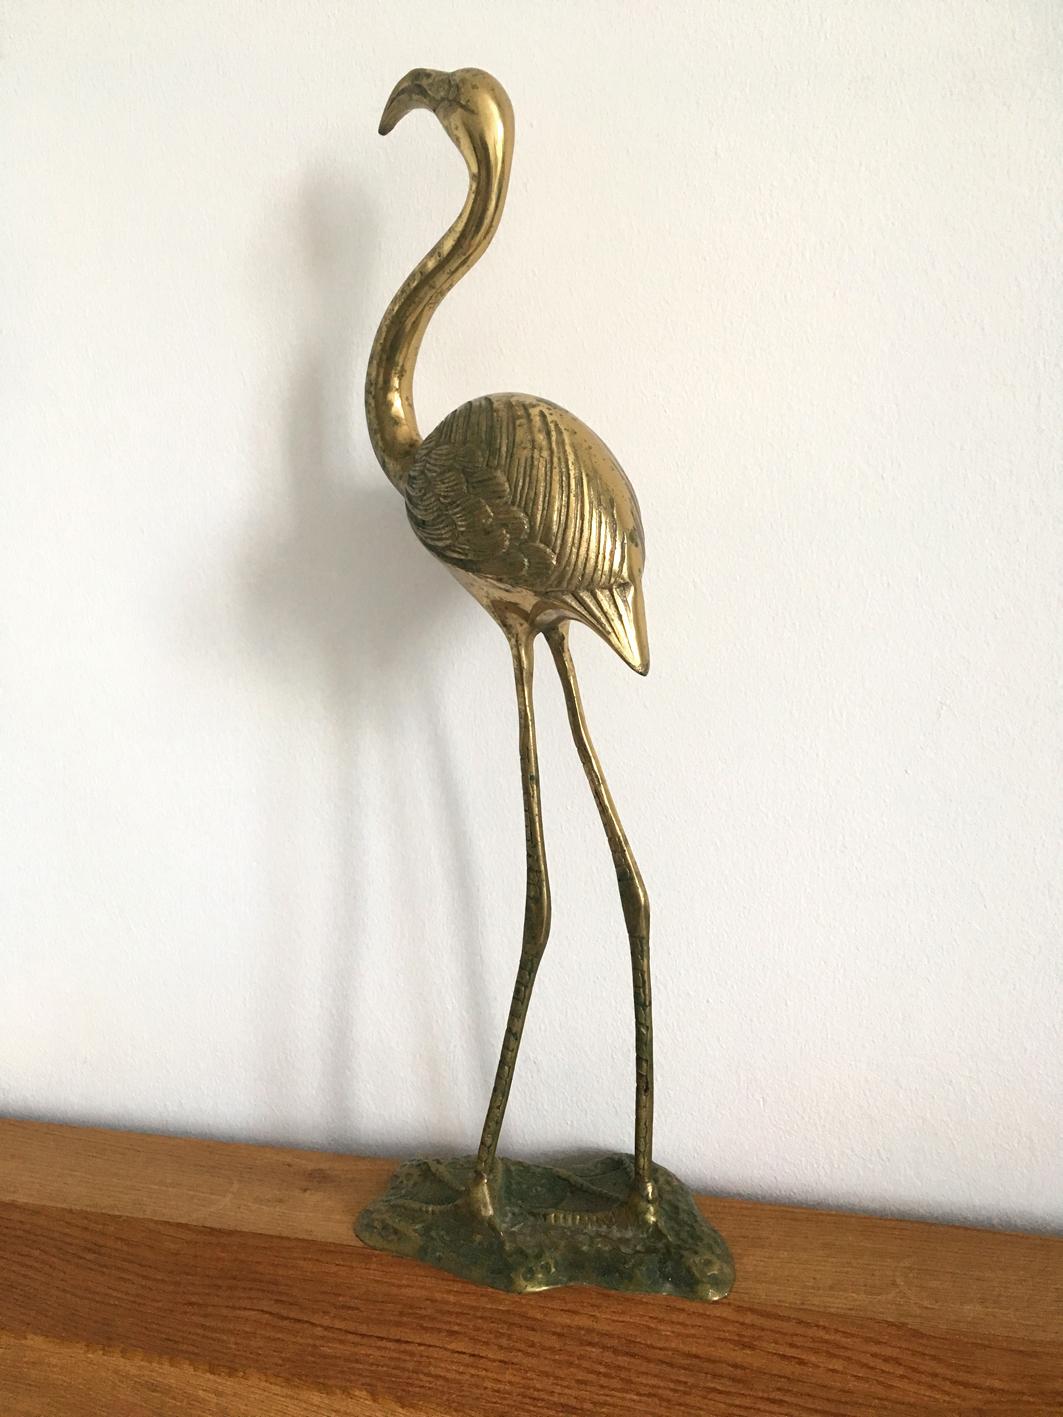 Very beautiful rare Mid-Century Modern XXL brass flamingo as decoration. Very high quality with many details. With beautiful patina on the brass. Slightly green oxidation on the foot.
It's very nice with this patina, but the brass could also be